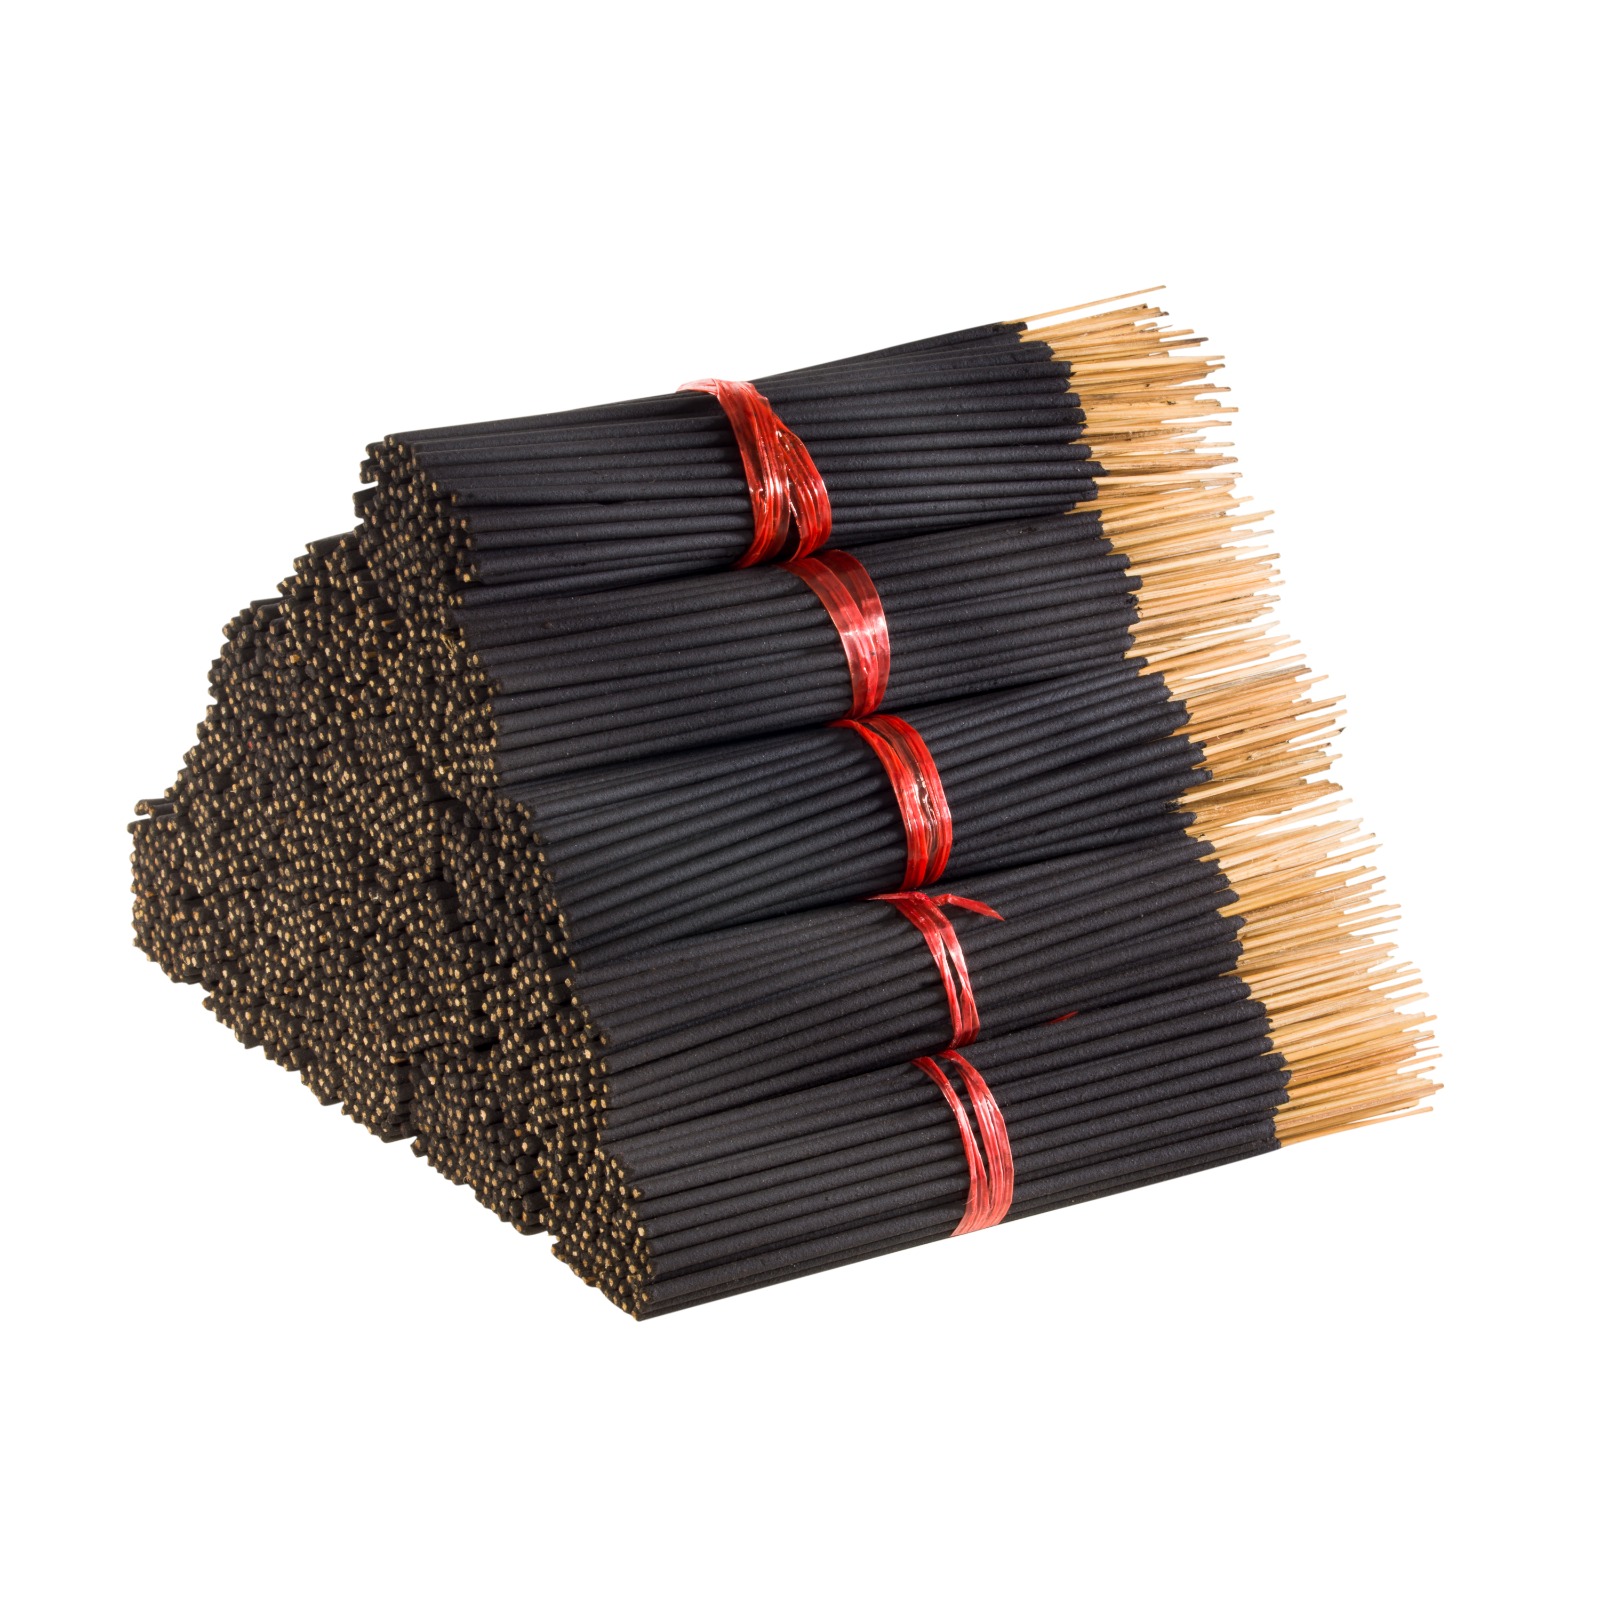 2'' BACKFLOW Unscented 100 Charcoal Incense Cones - Ideal for